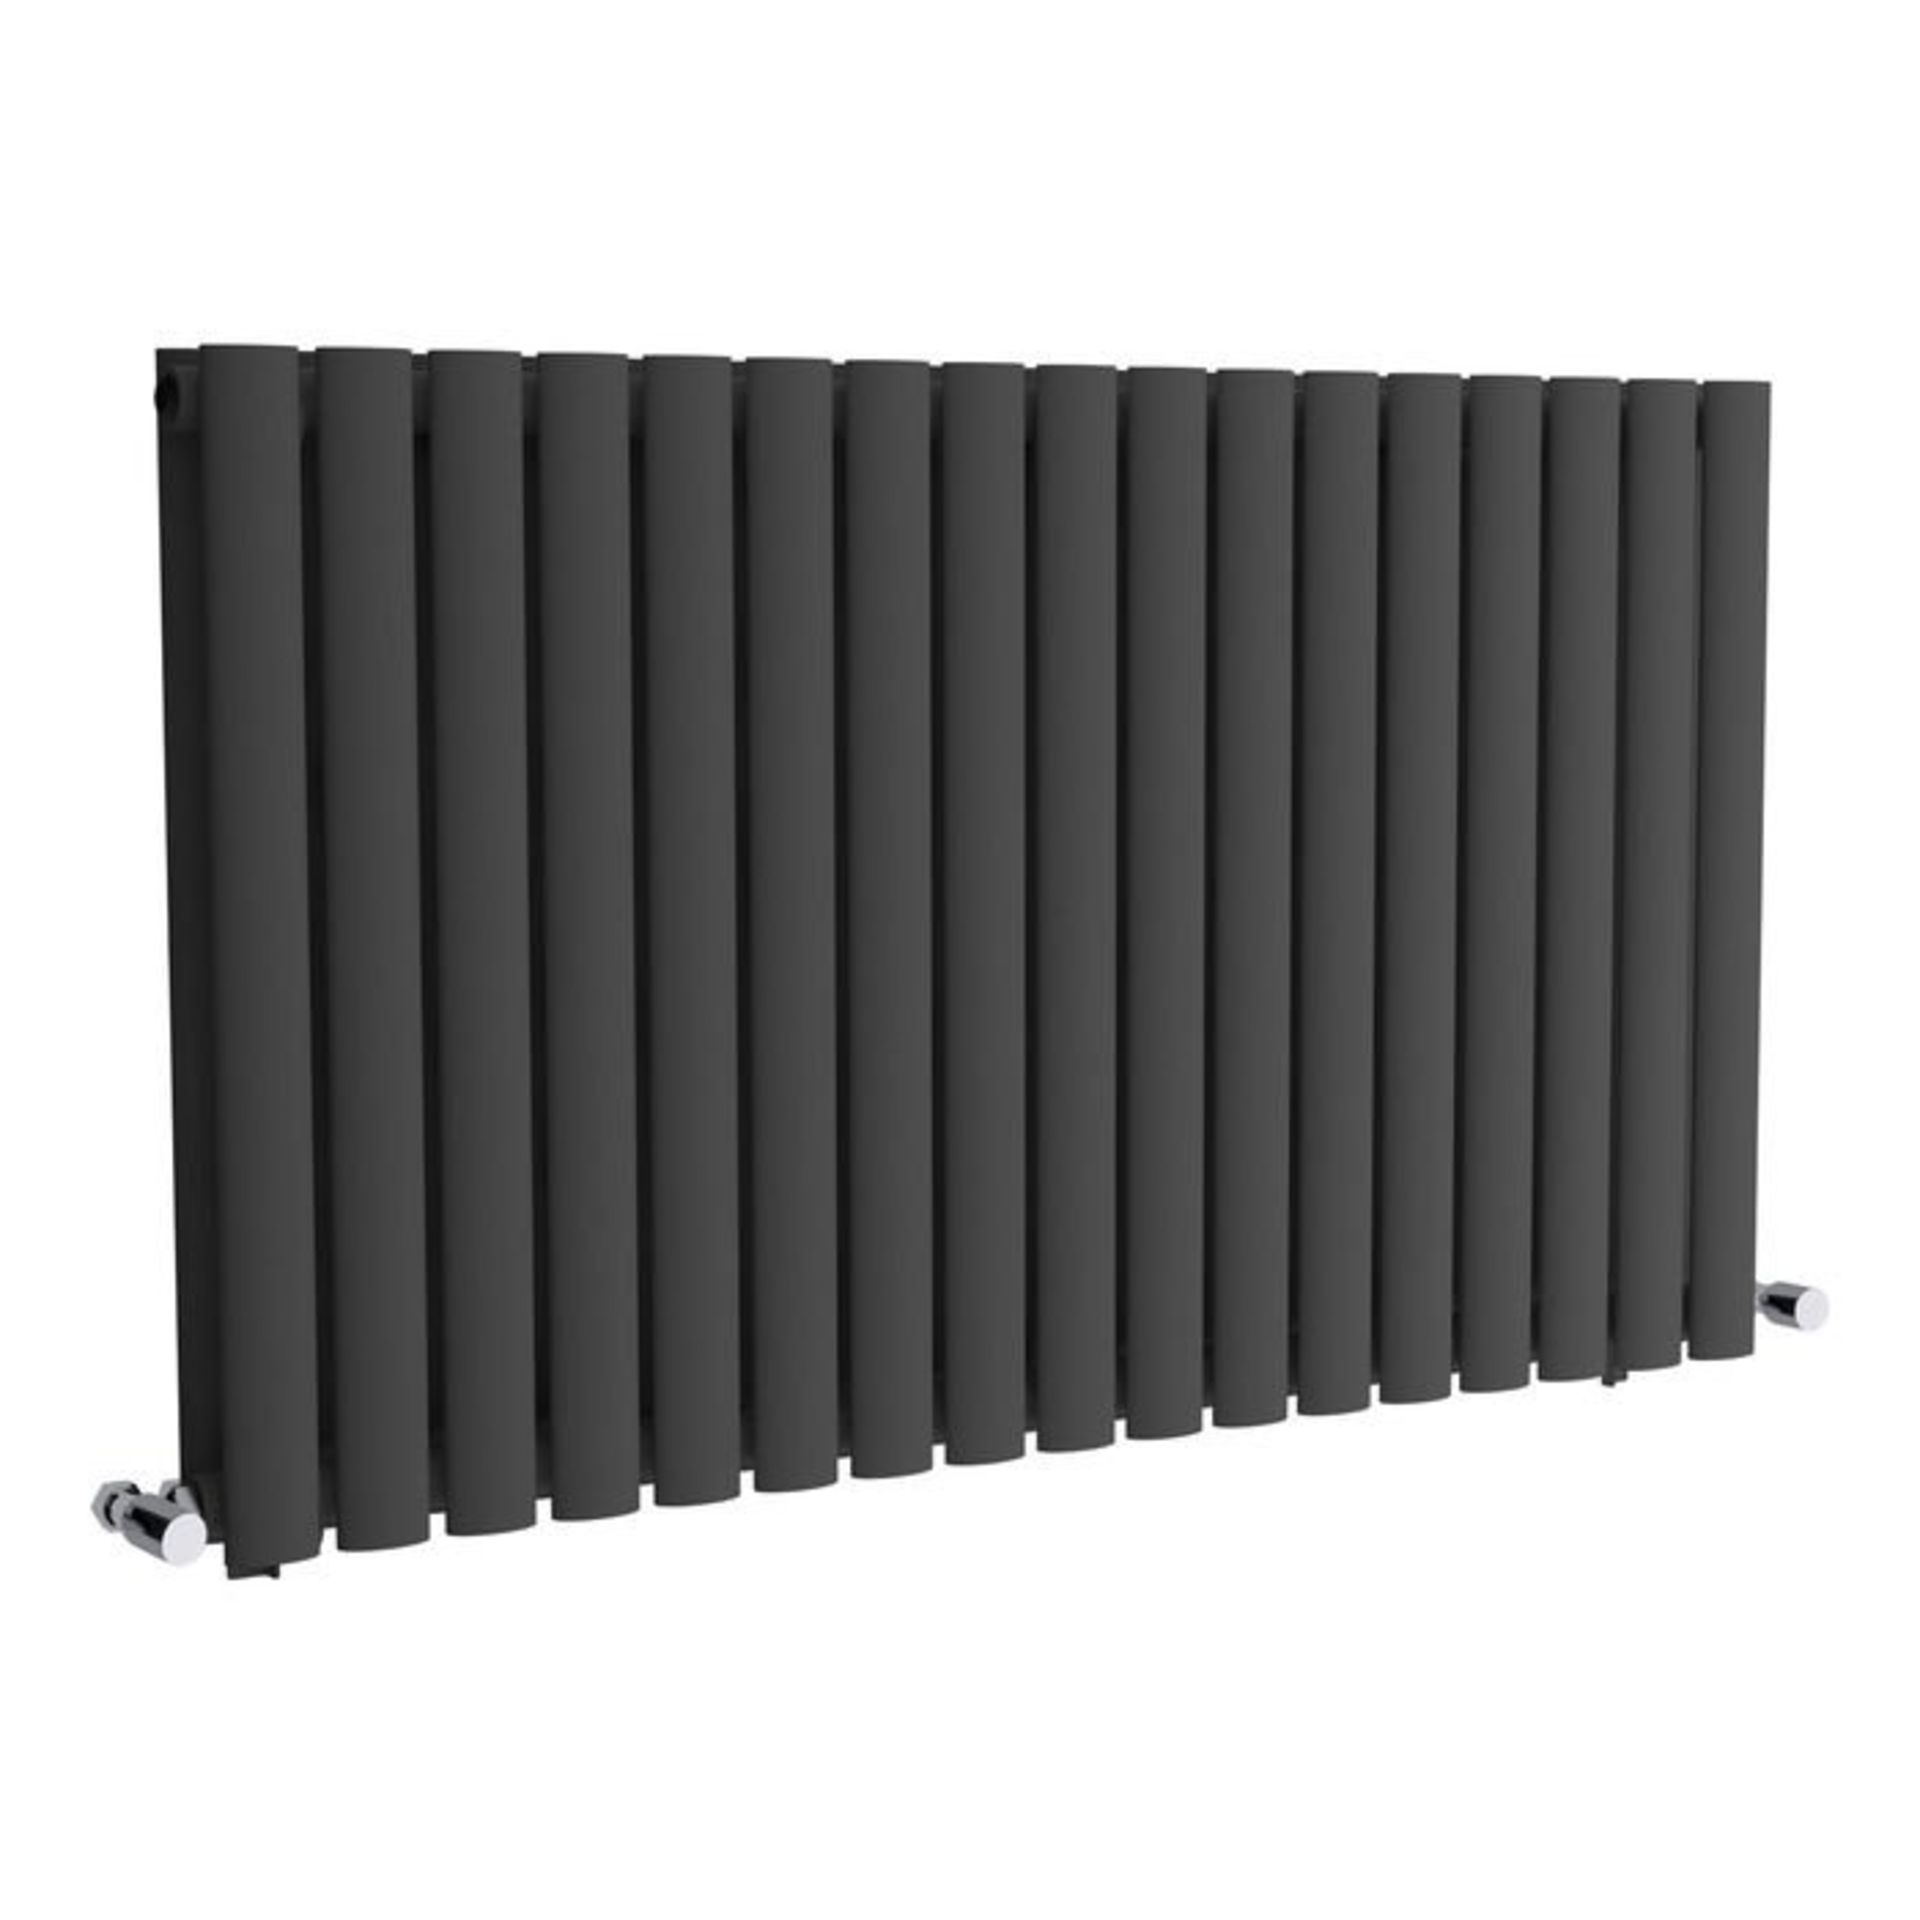 (L77) 600x1020mm Anthracite Double Panel Oval Tube Horizontal Radiator. RRP £351.99. Low carbon - Image 3 of 3